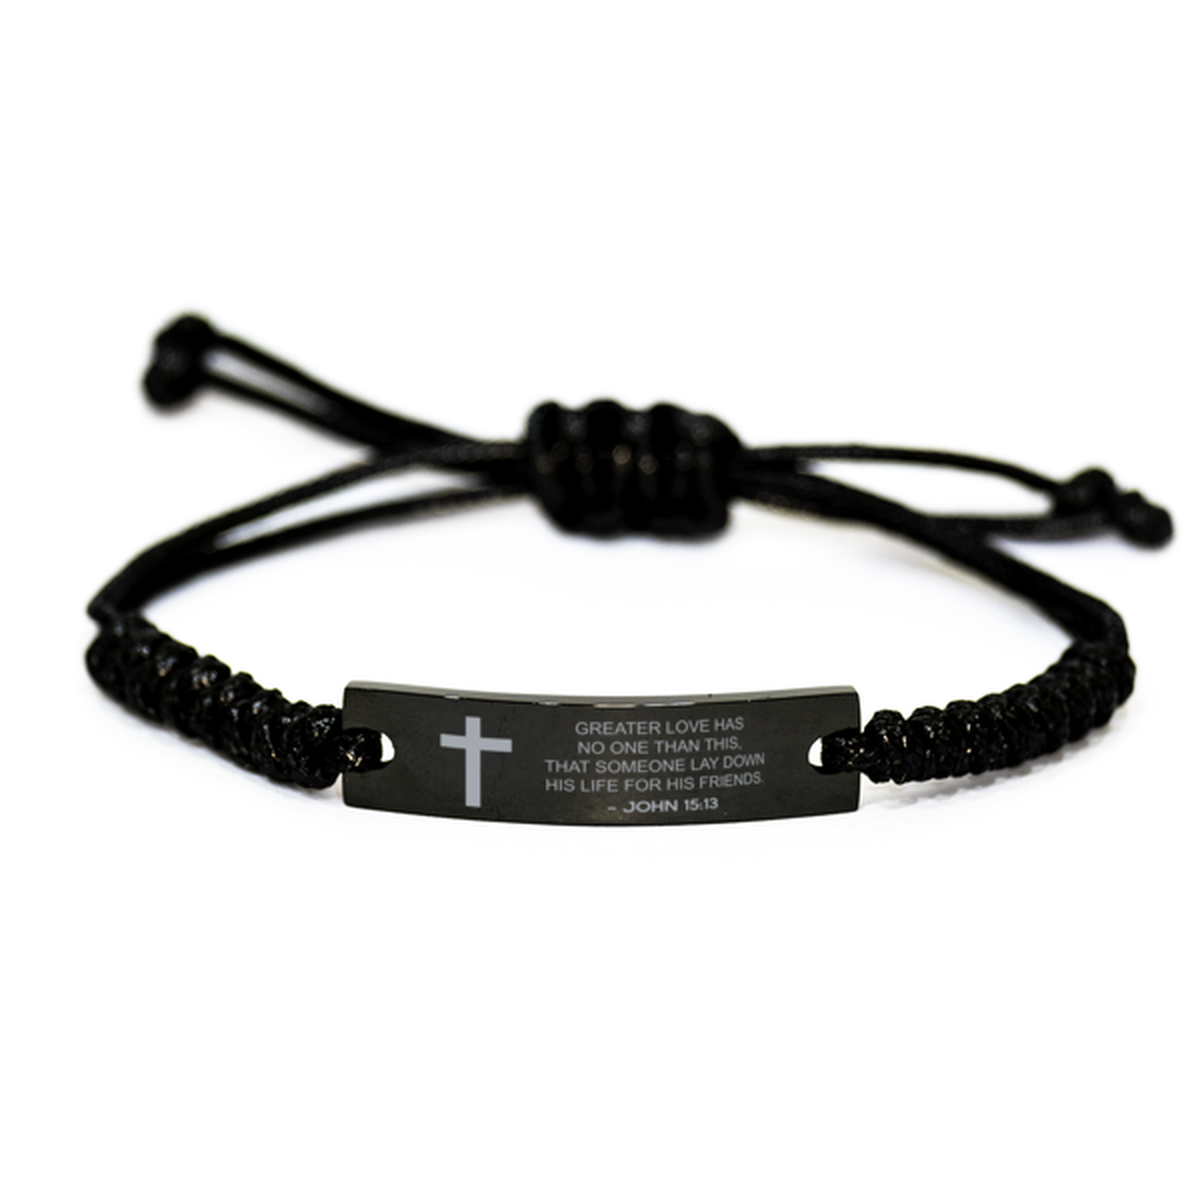 Bible Verse Rope Bracelet, John 15:13 Greater Love Has No One Than This, That Someone, Christian Encouraging Gifts For Men Women Boys Girls